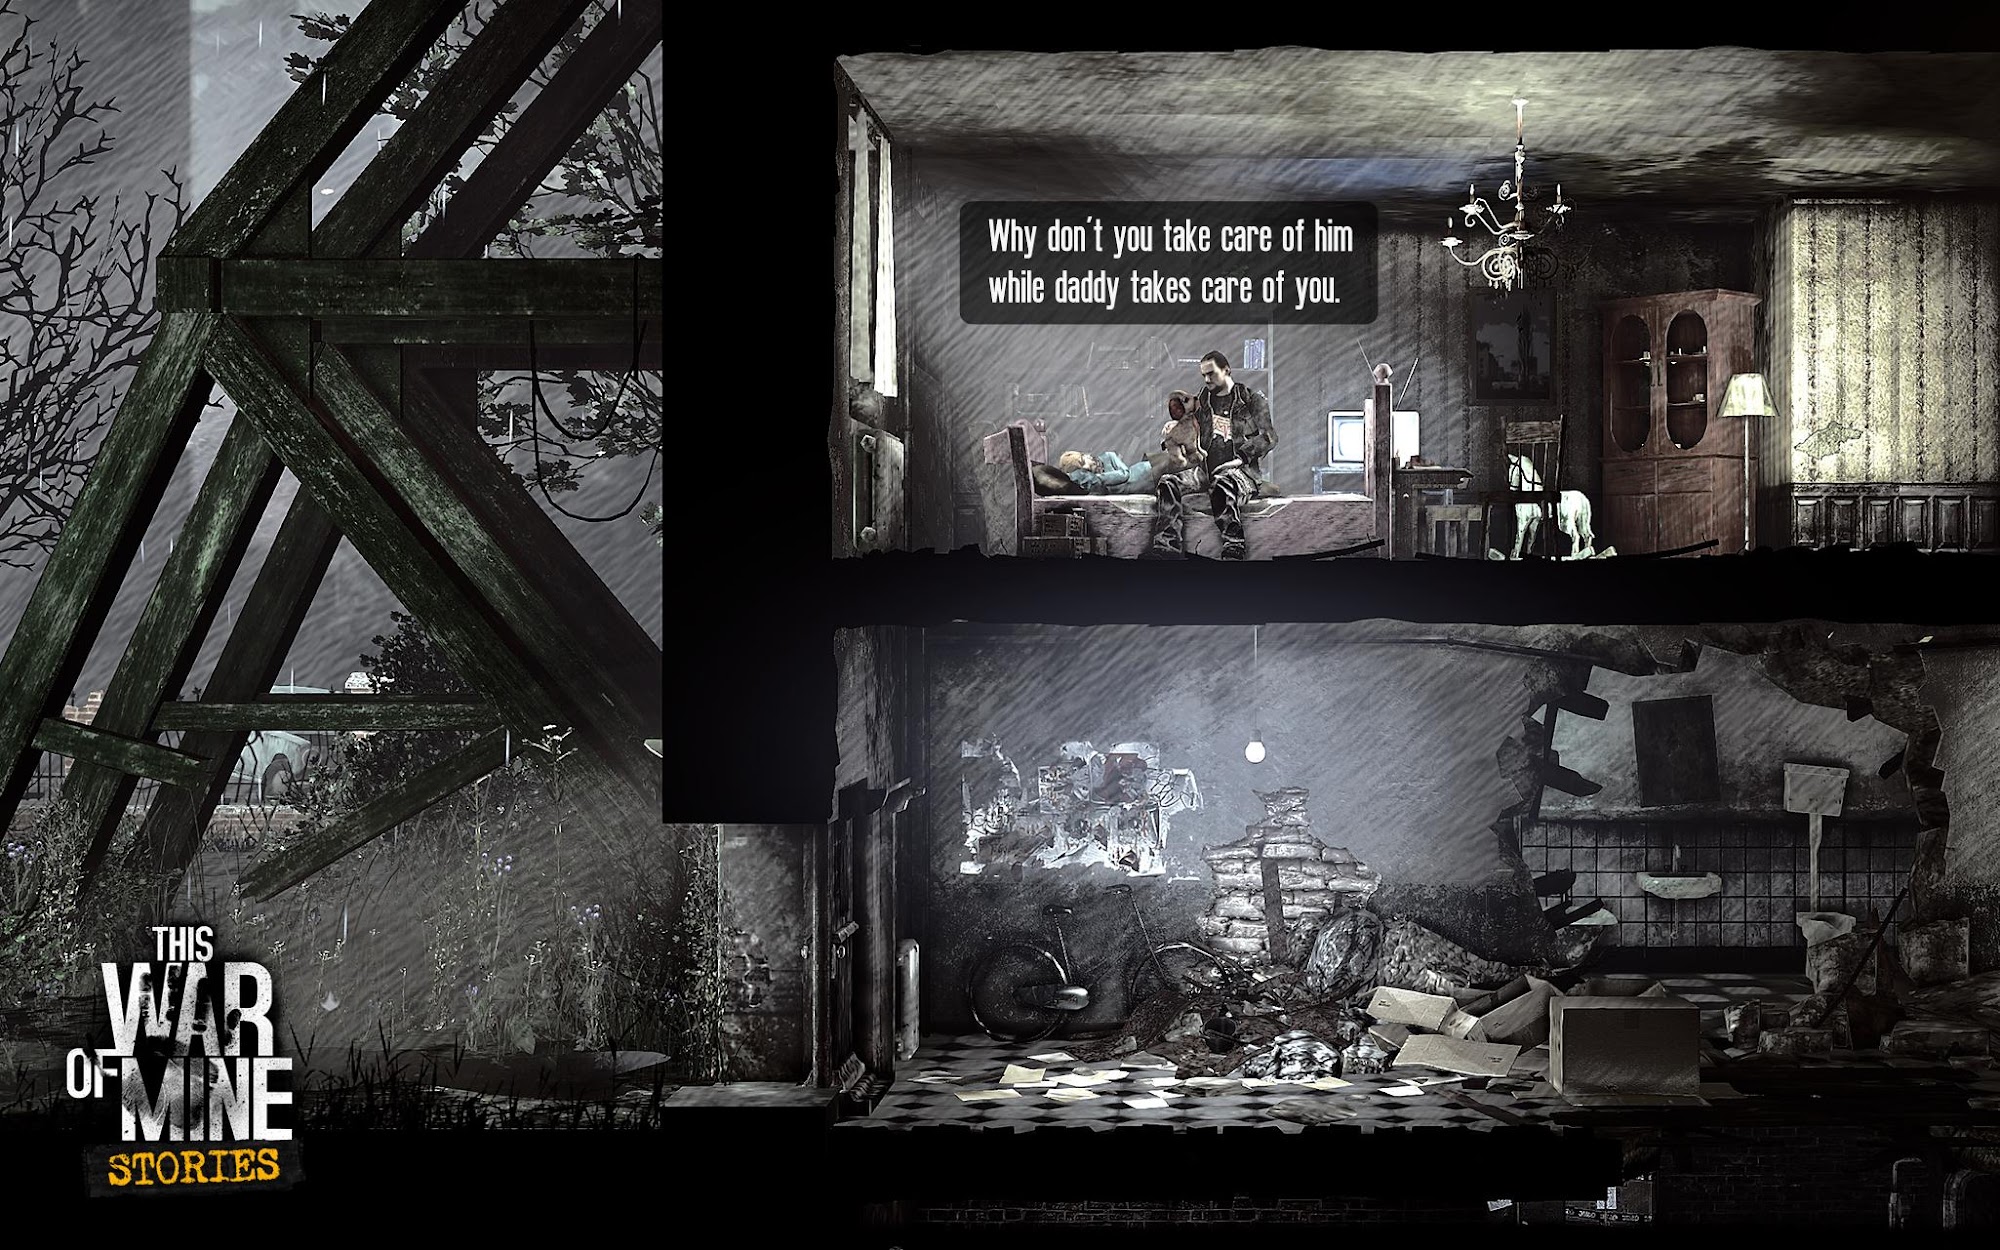 Baixar This War of Mine: Stories Ep 1 para Android grátis.